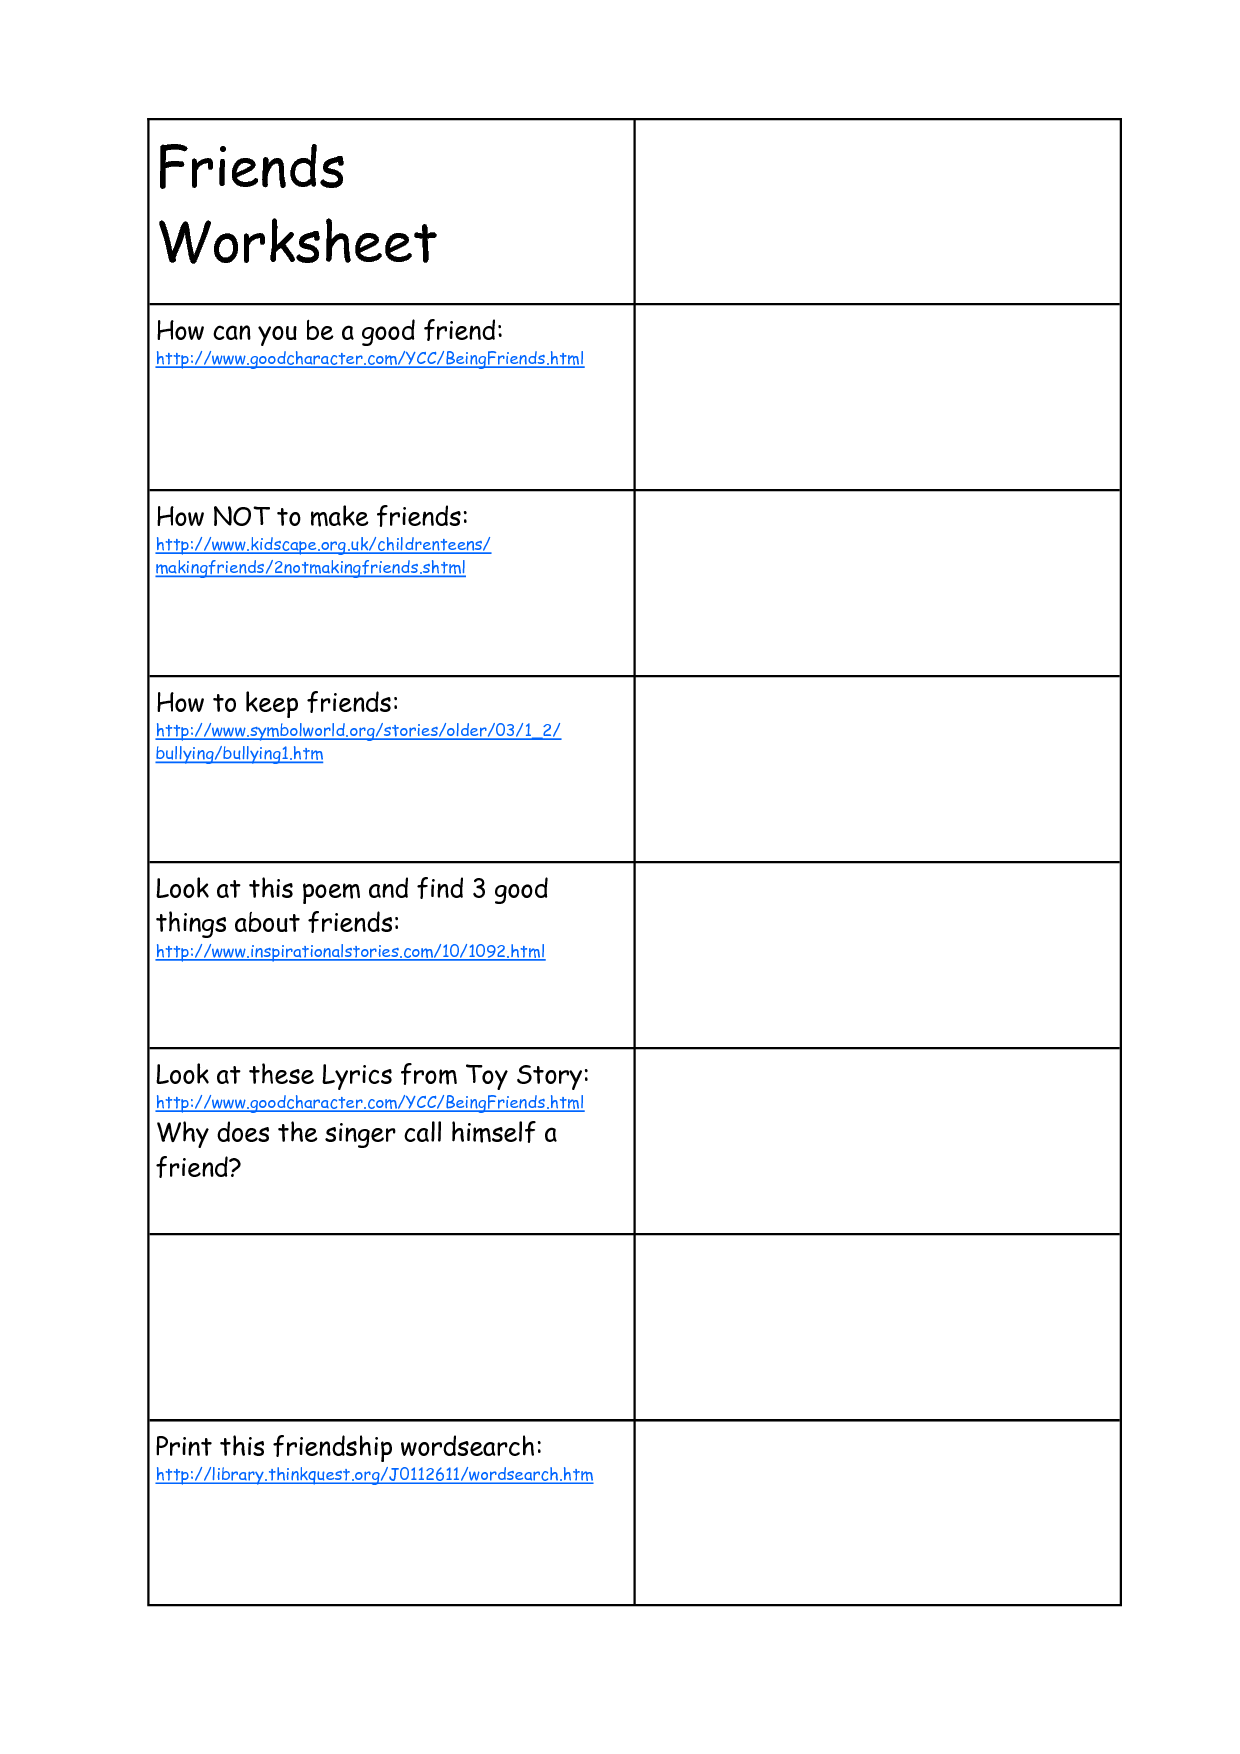 15-best-images-of-find-a-friend-worksheet-all-about-my-friend-worksheet-friend-interview